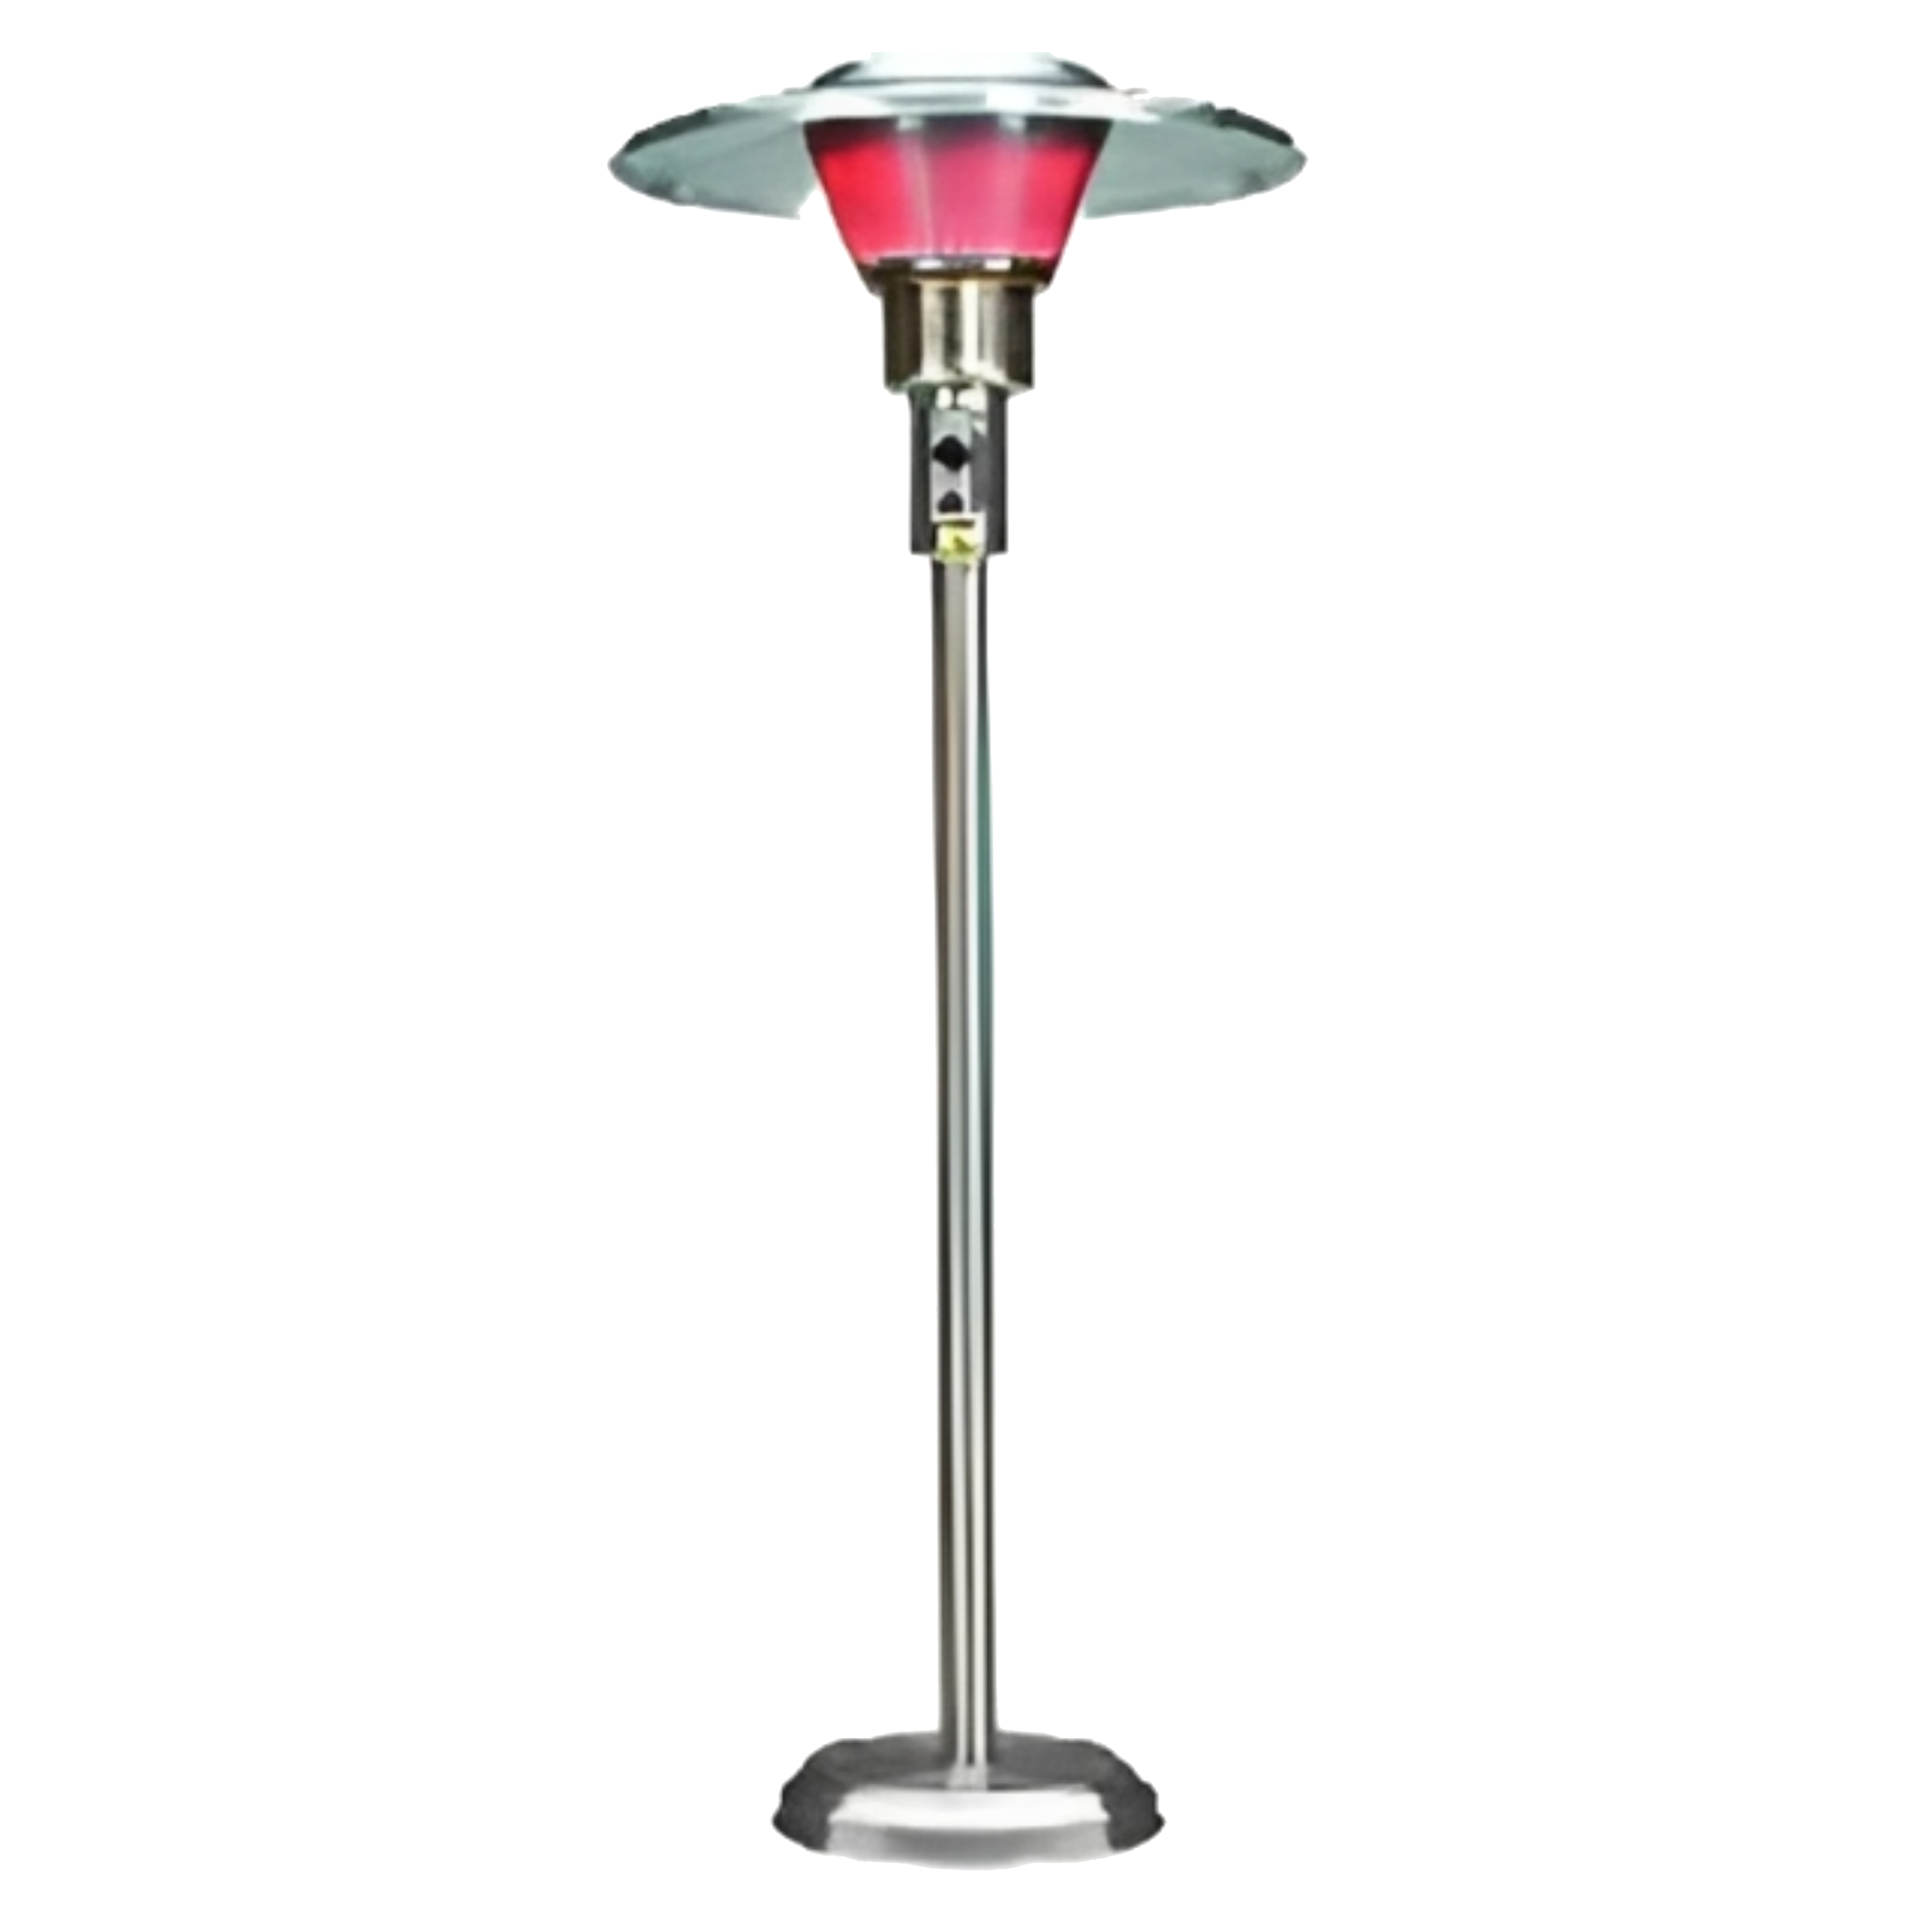 4005-CB Infrasave 4000 Series Infrared Portable Stainless Steel Patio Heater, Free-Standing Parasol Model, Propane Gas, 38,000 BTU